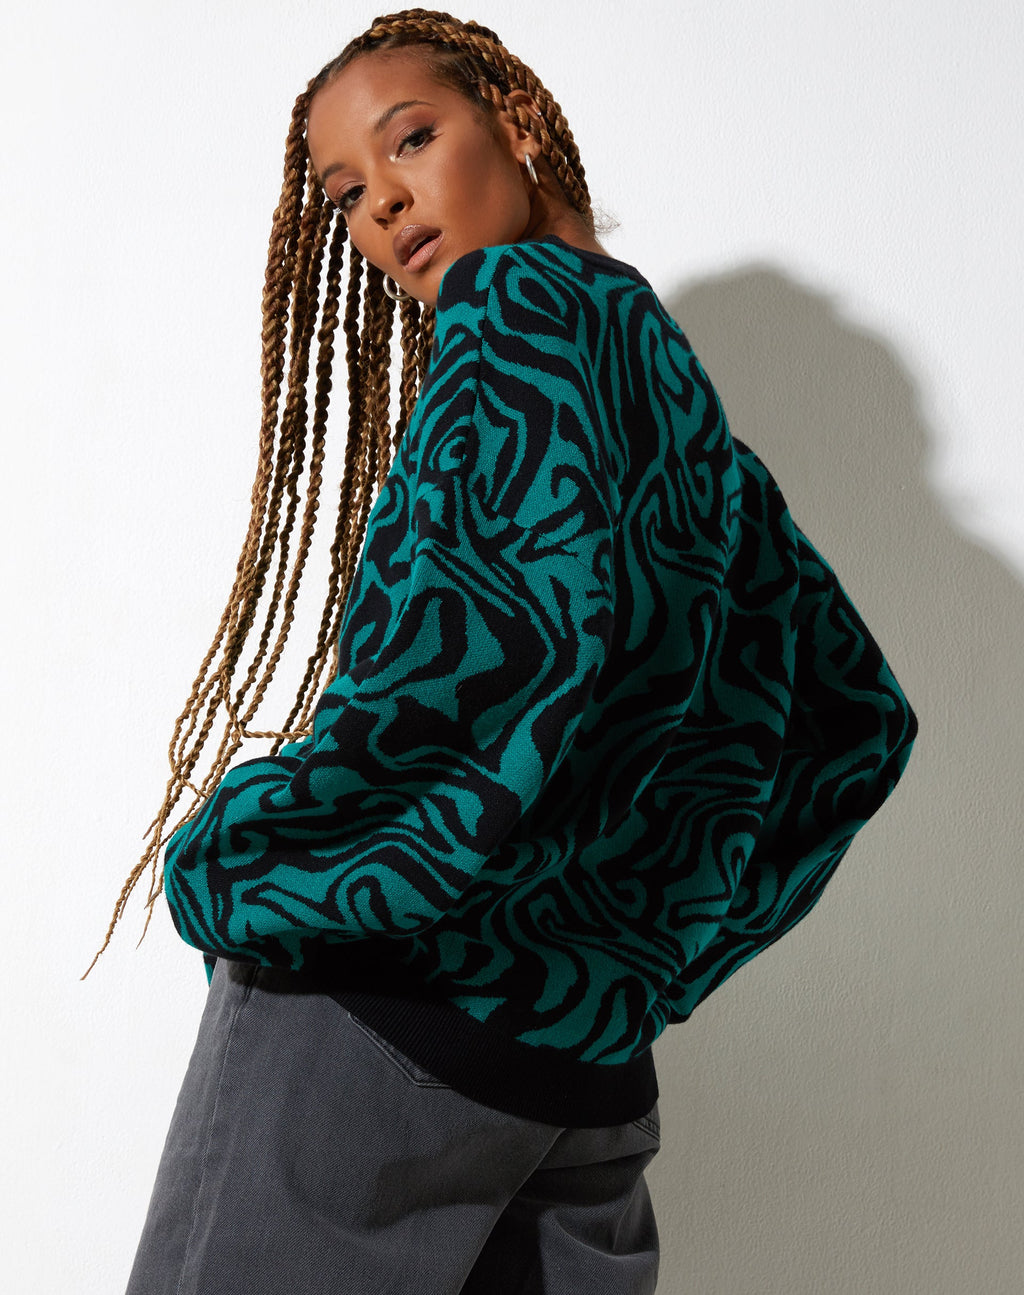 Mably Jumper in Jagged Swirl Green and Black